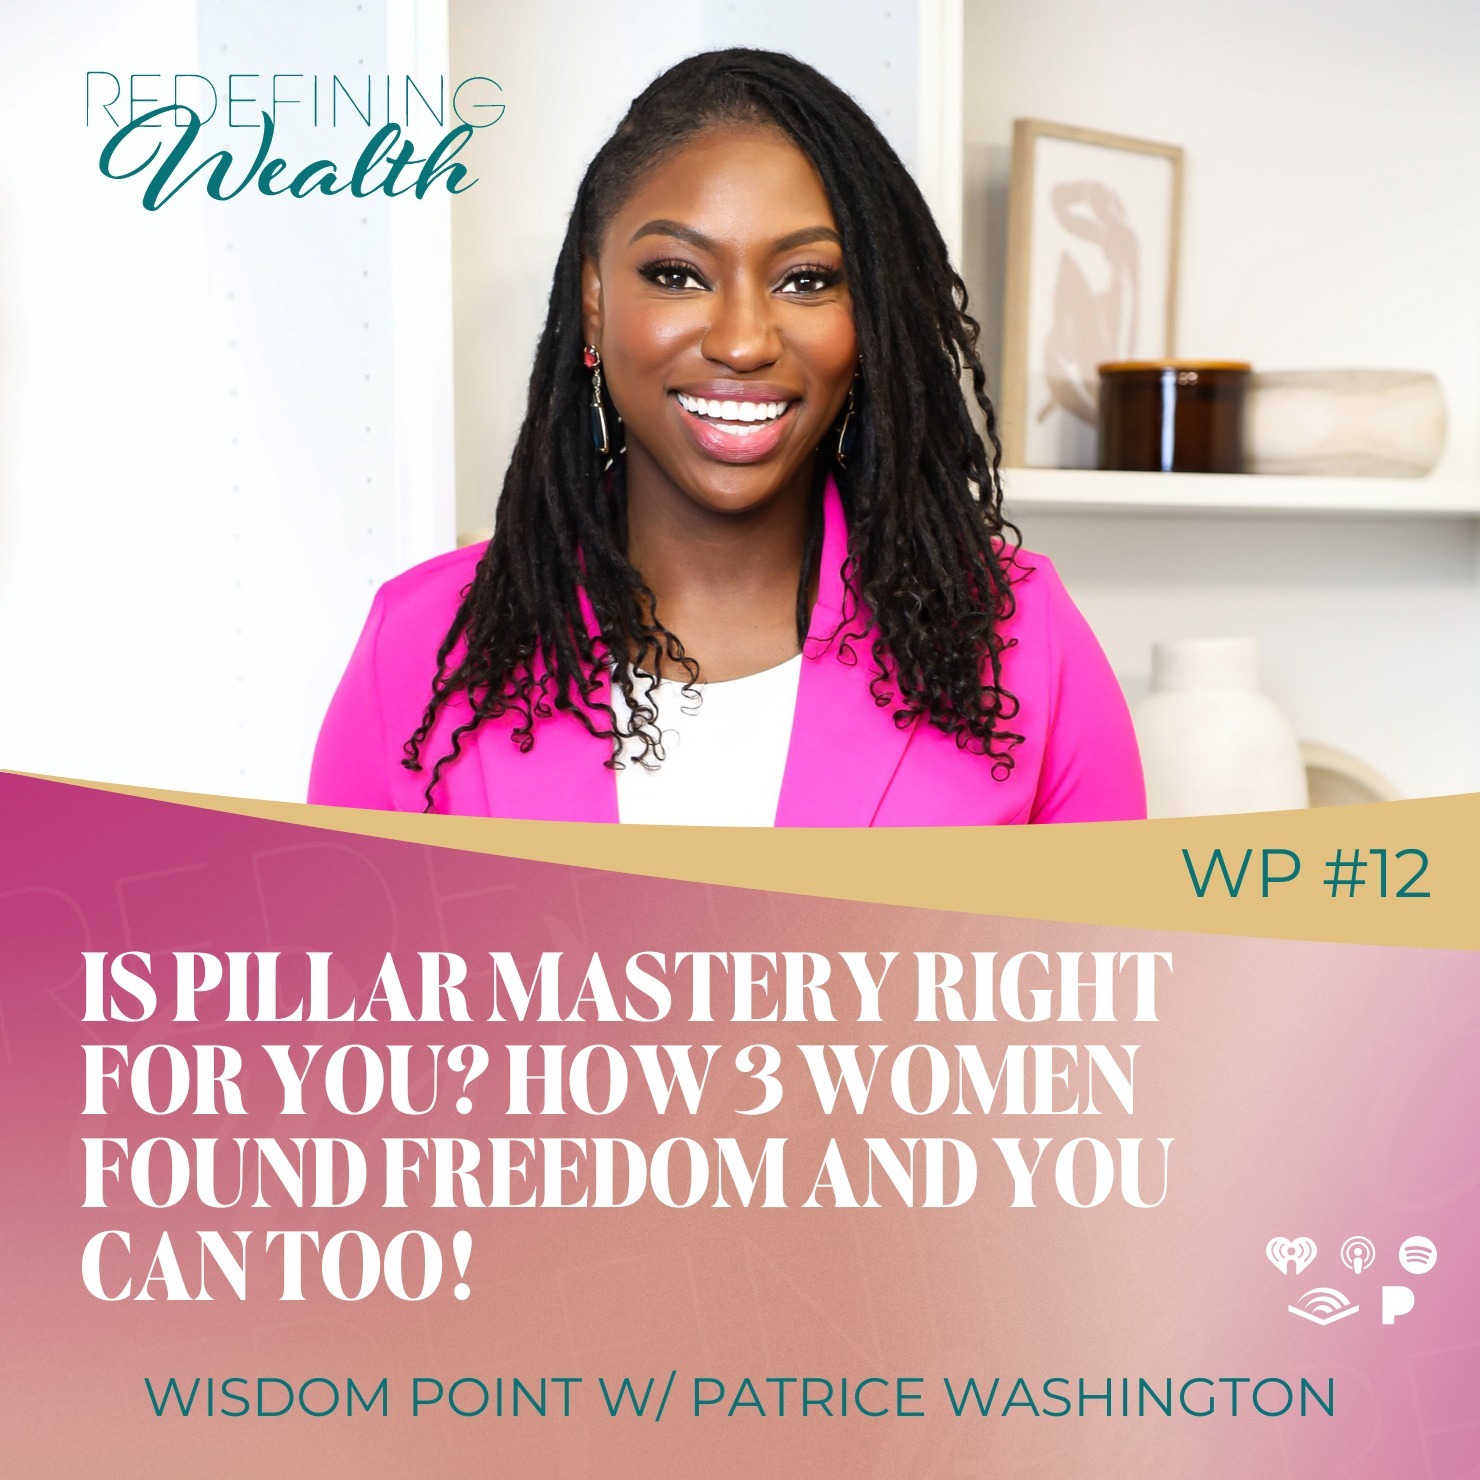 Wisdom Point #12 - Is Pillar Mastery Right For You? How 3 Women Found Freedom and You Can Too!